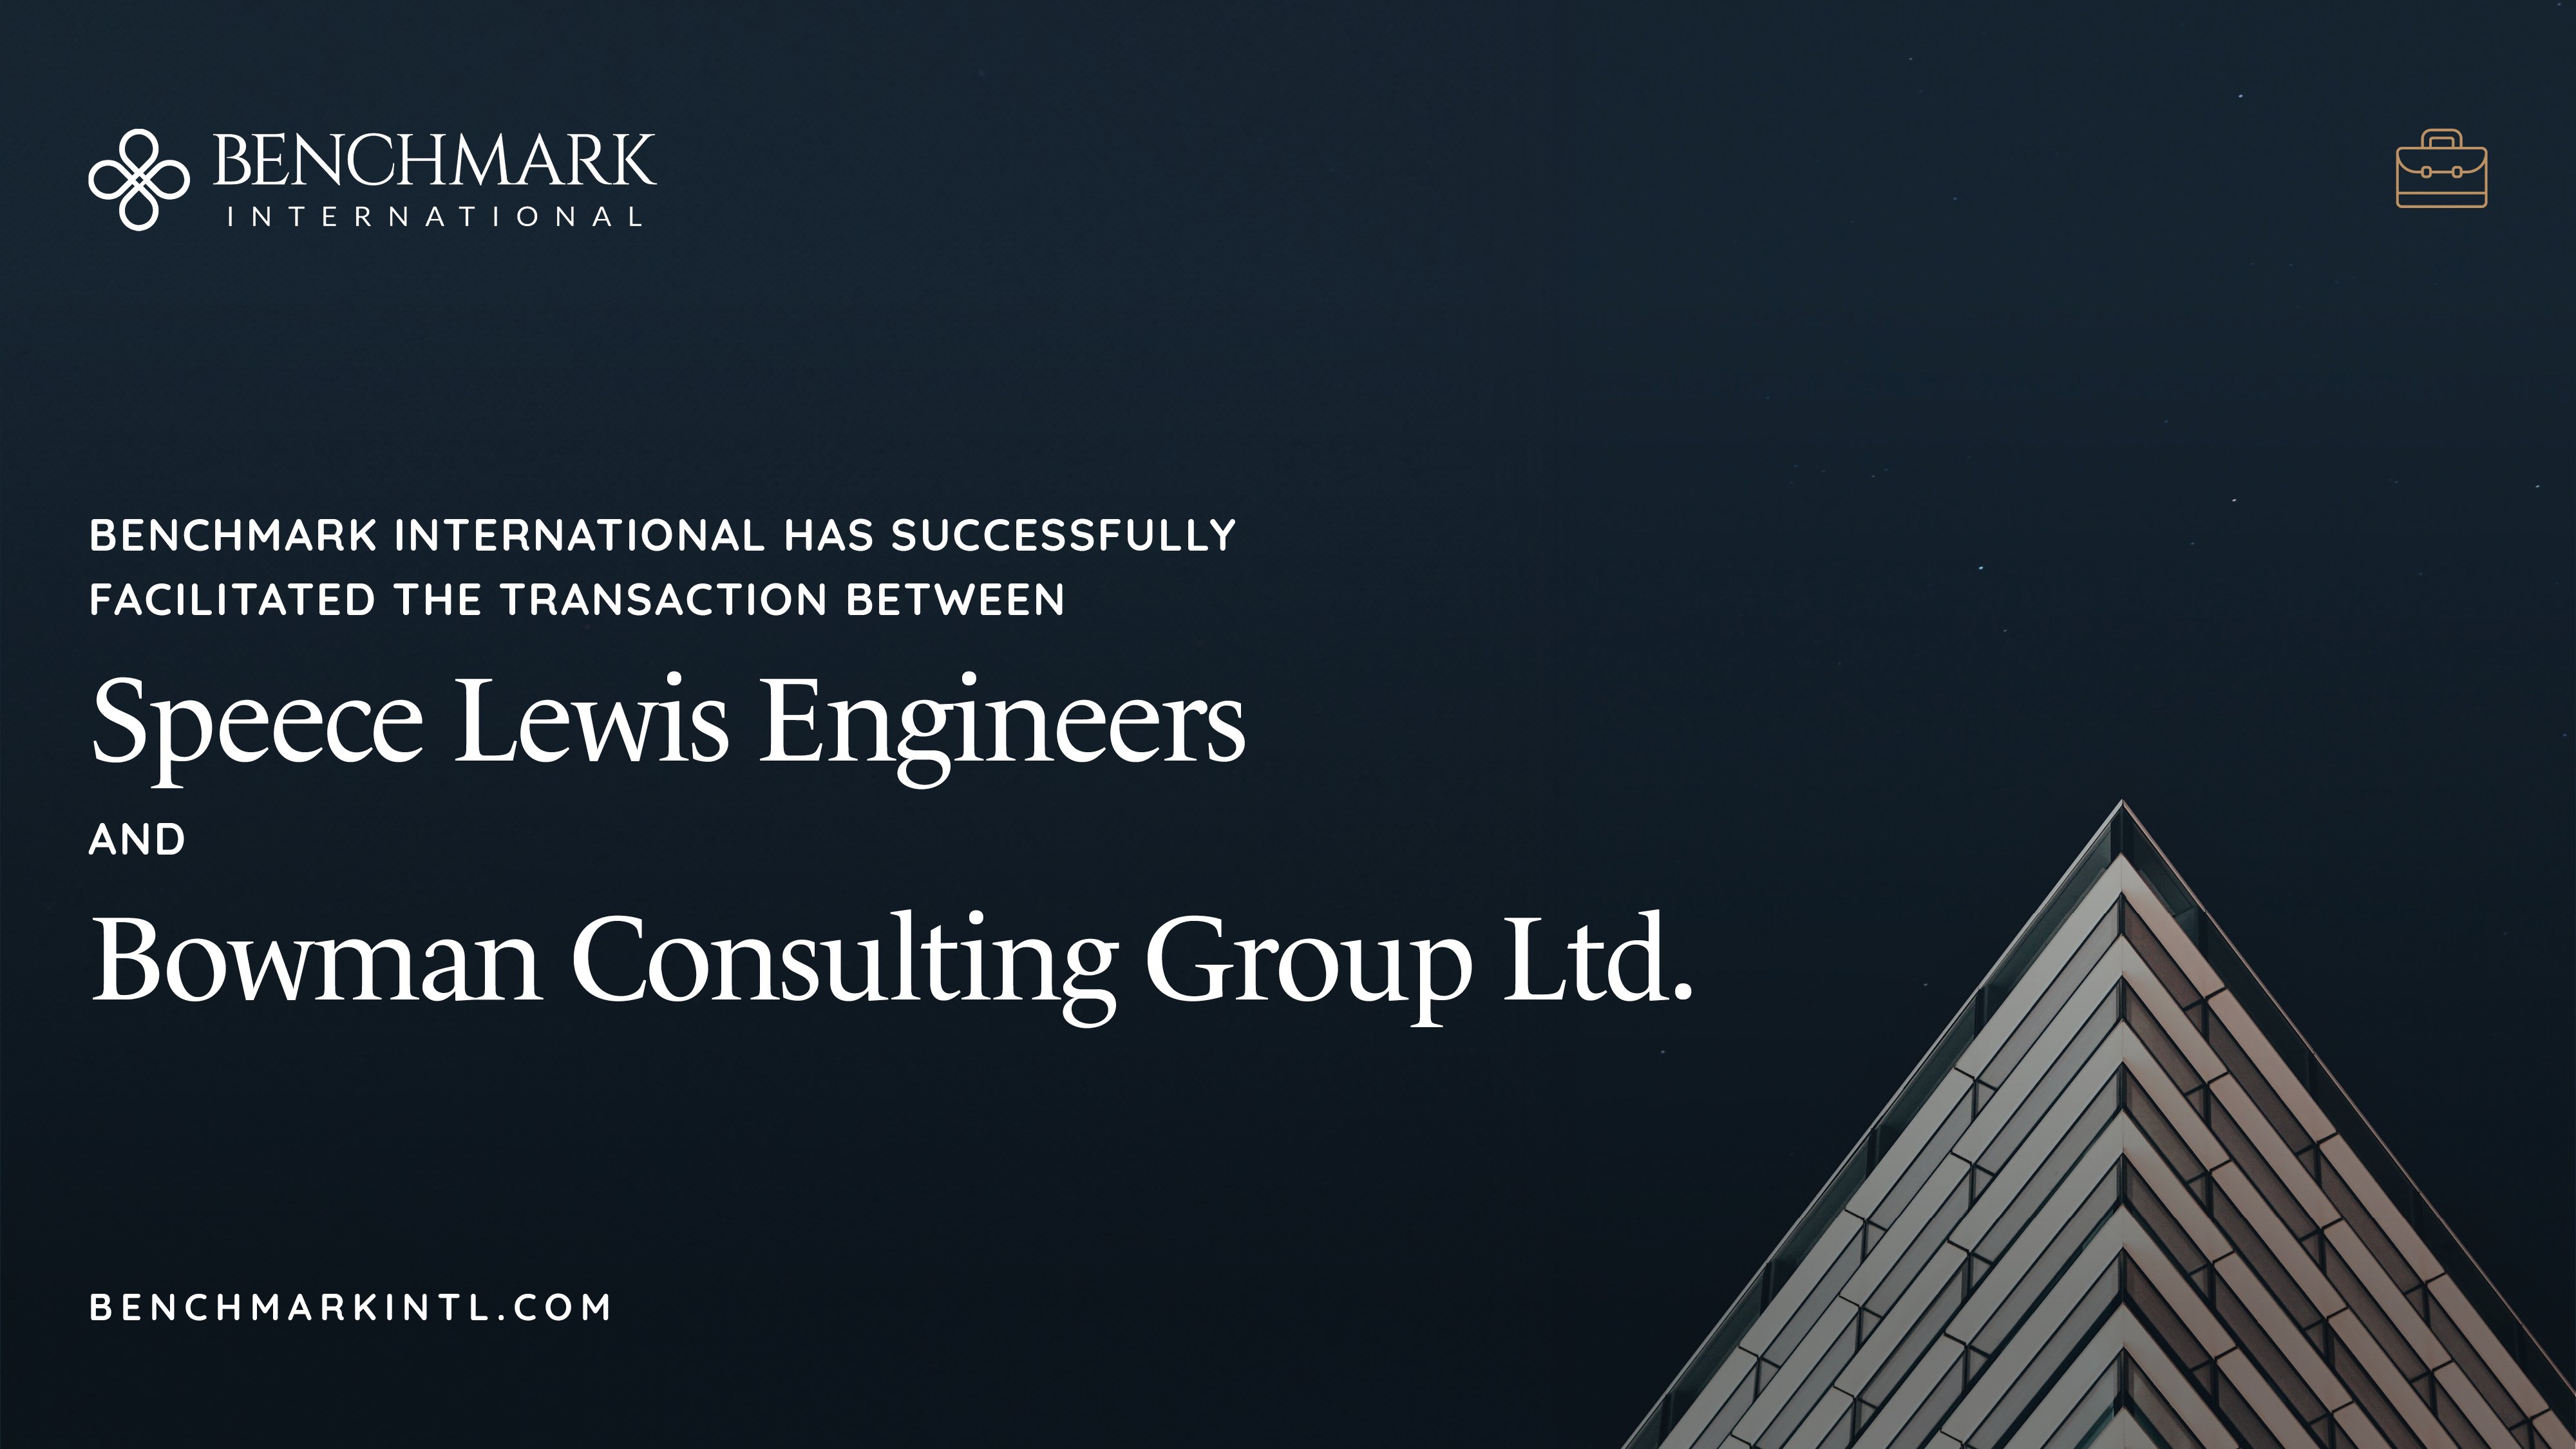 Benchmark International Successfully Facilitated The Transaction Between Speece Lewis Engineers And Bowman Consulting Group LTD.